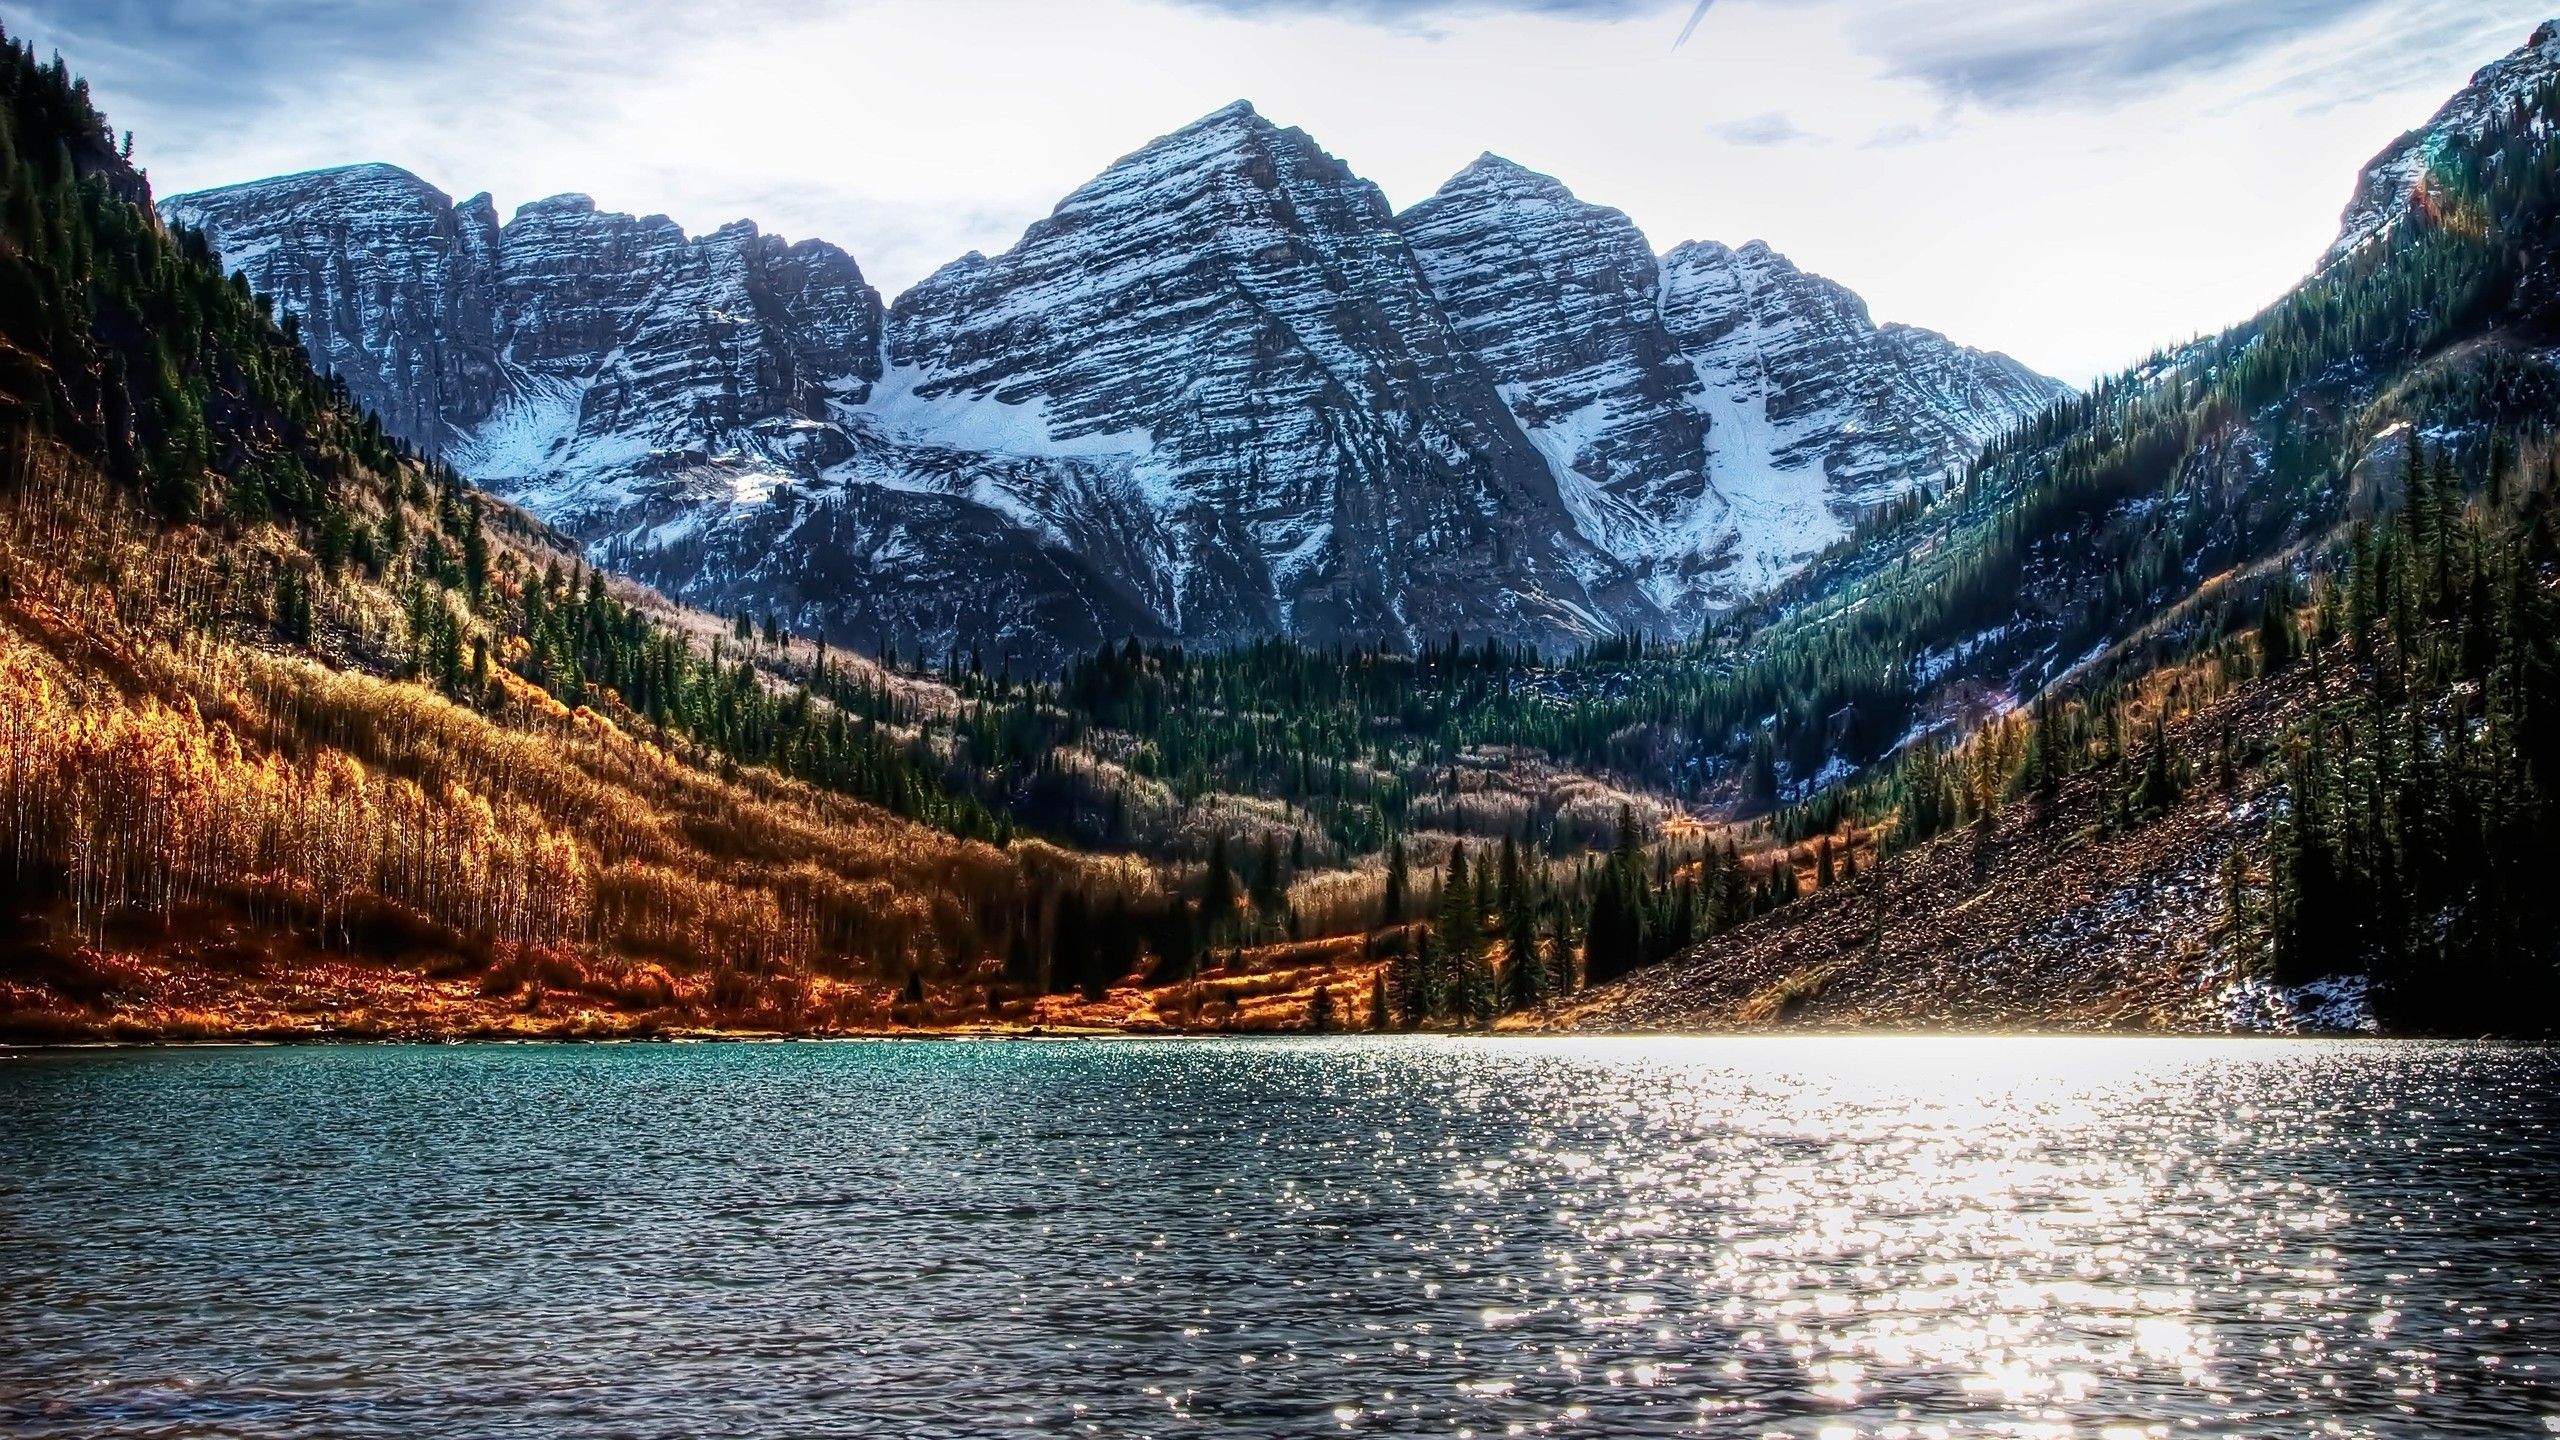 Download 2560x1440 Maroon Bells and Crater lake wallpaper